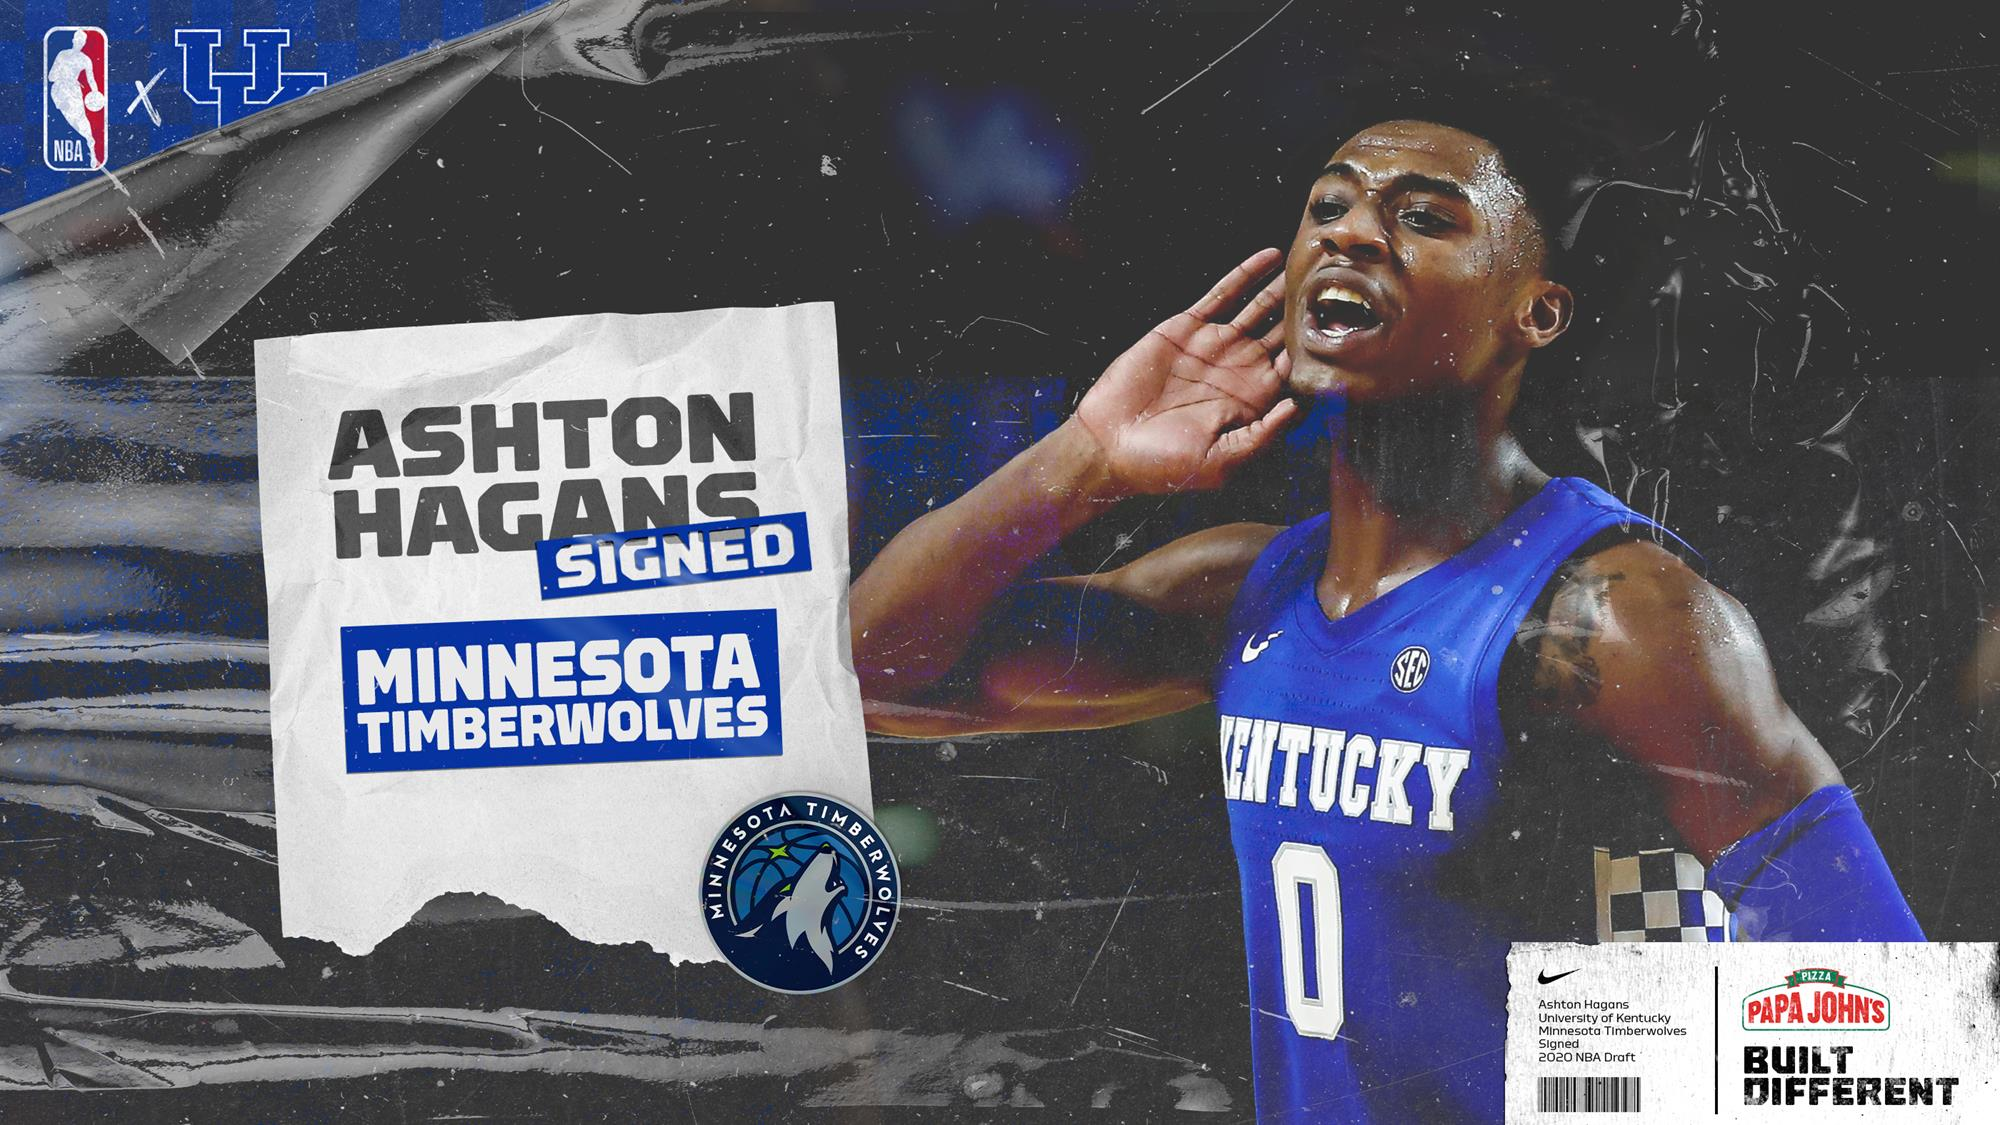 Hagans Signs Two-Way Contract with Minnesota Timberwolves